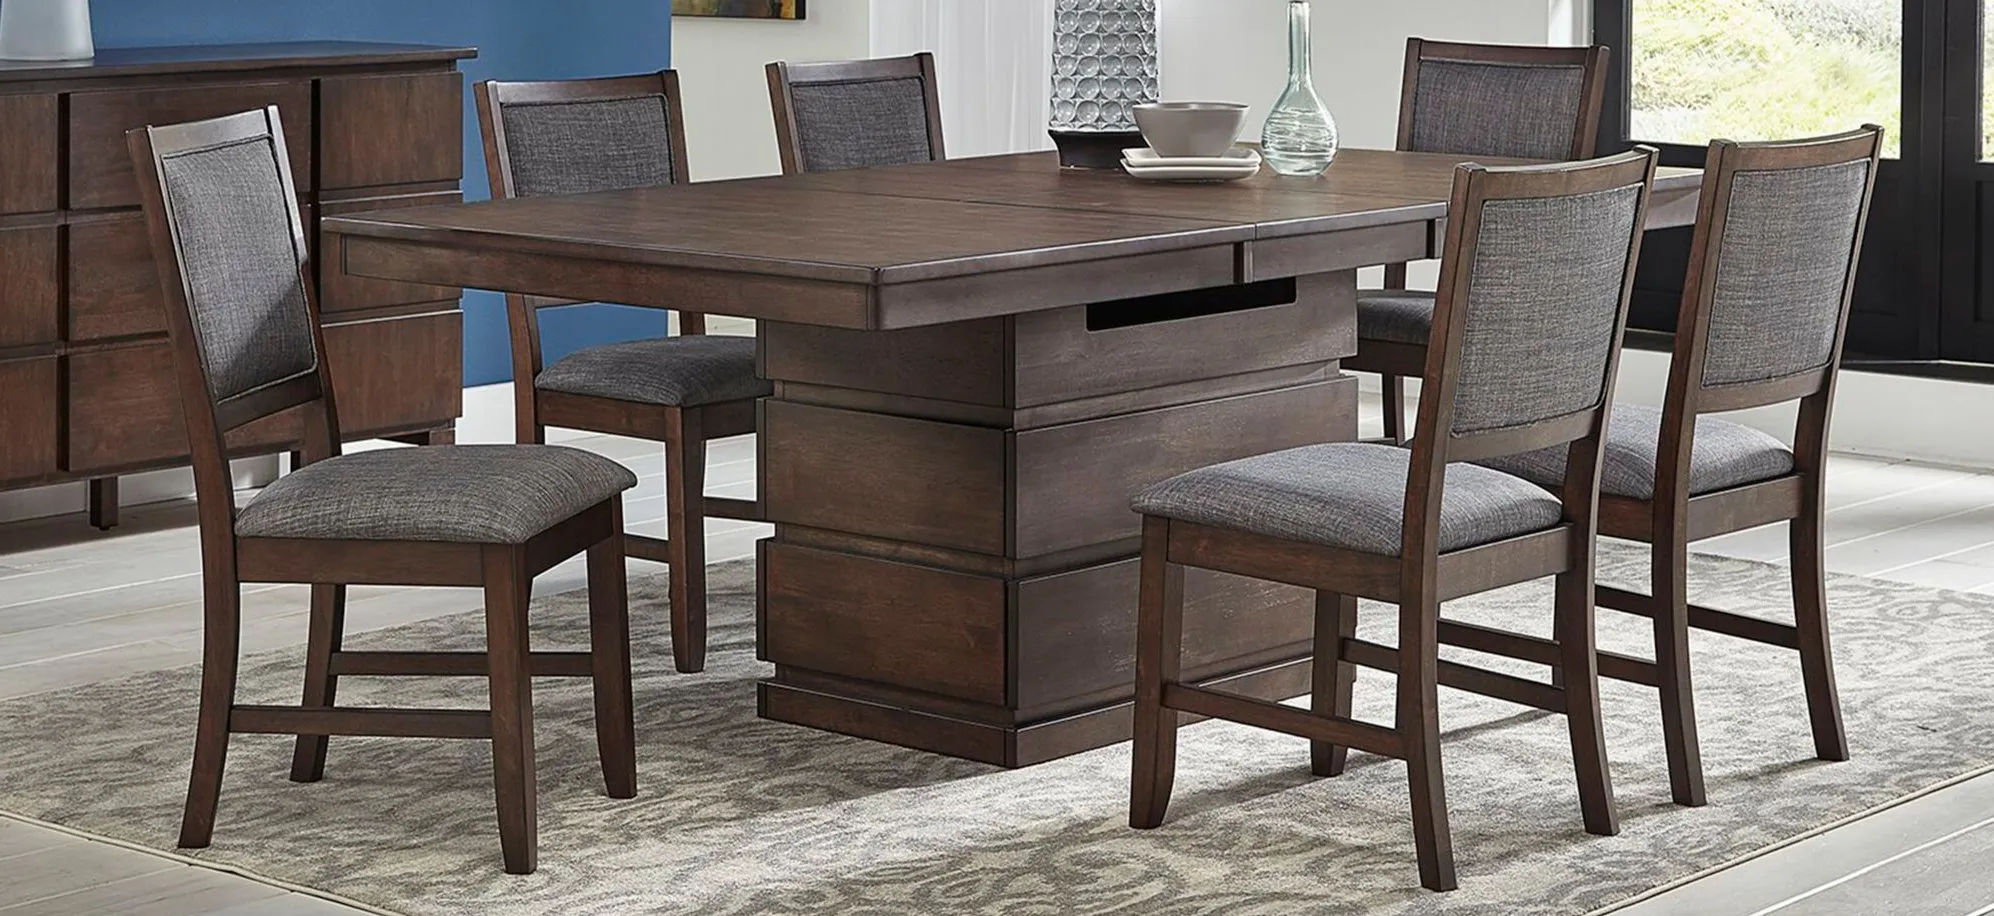 Chesney 7-pc. Dining Set with Adjustable-Height Table in FALCON BROWN by A-America